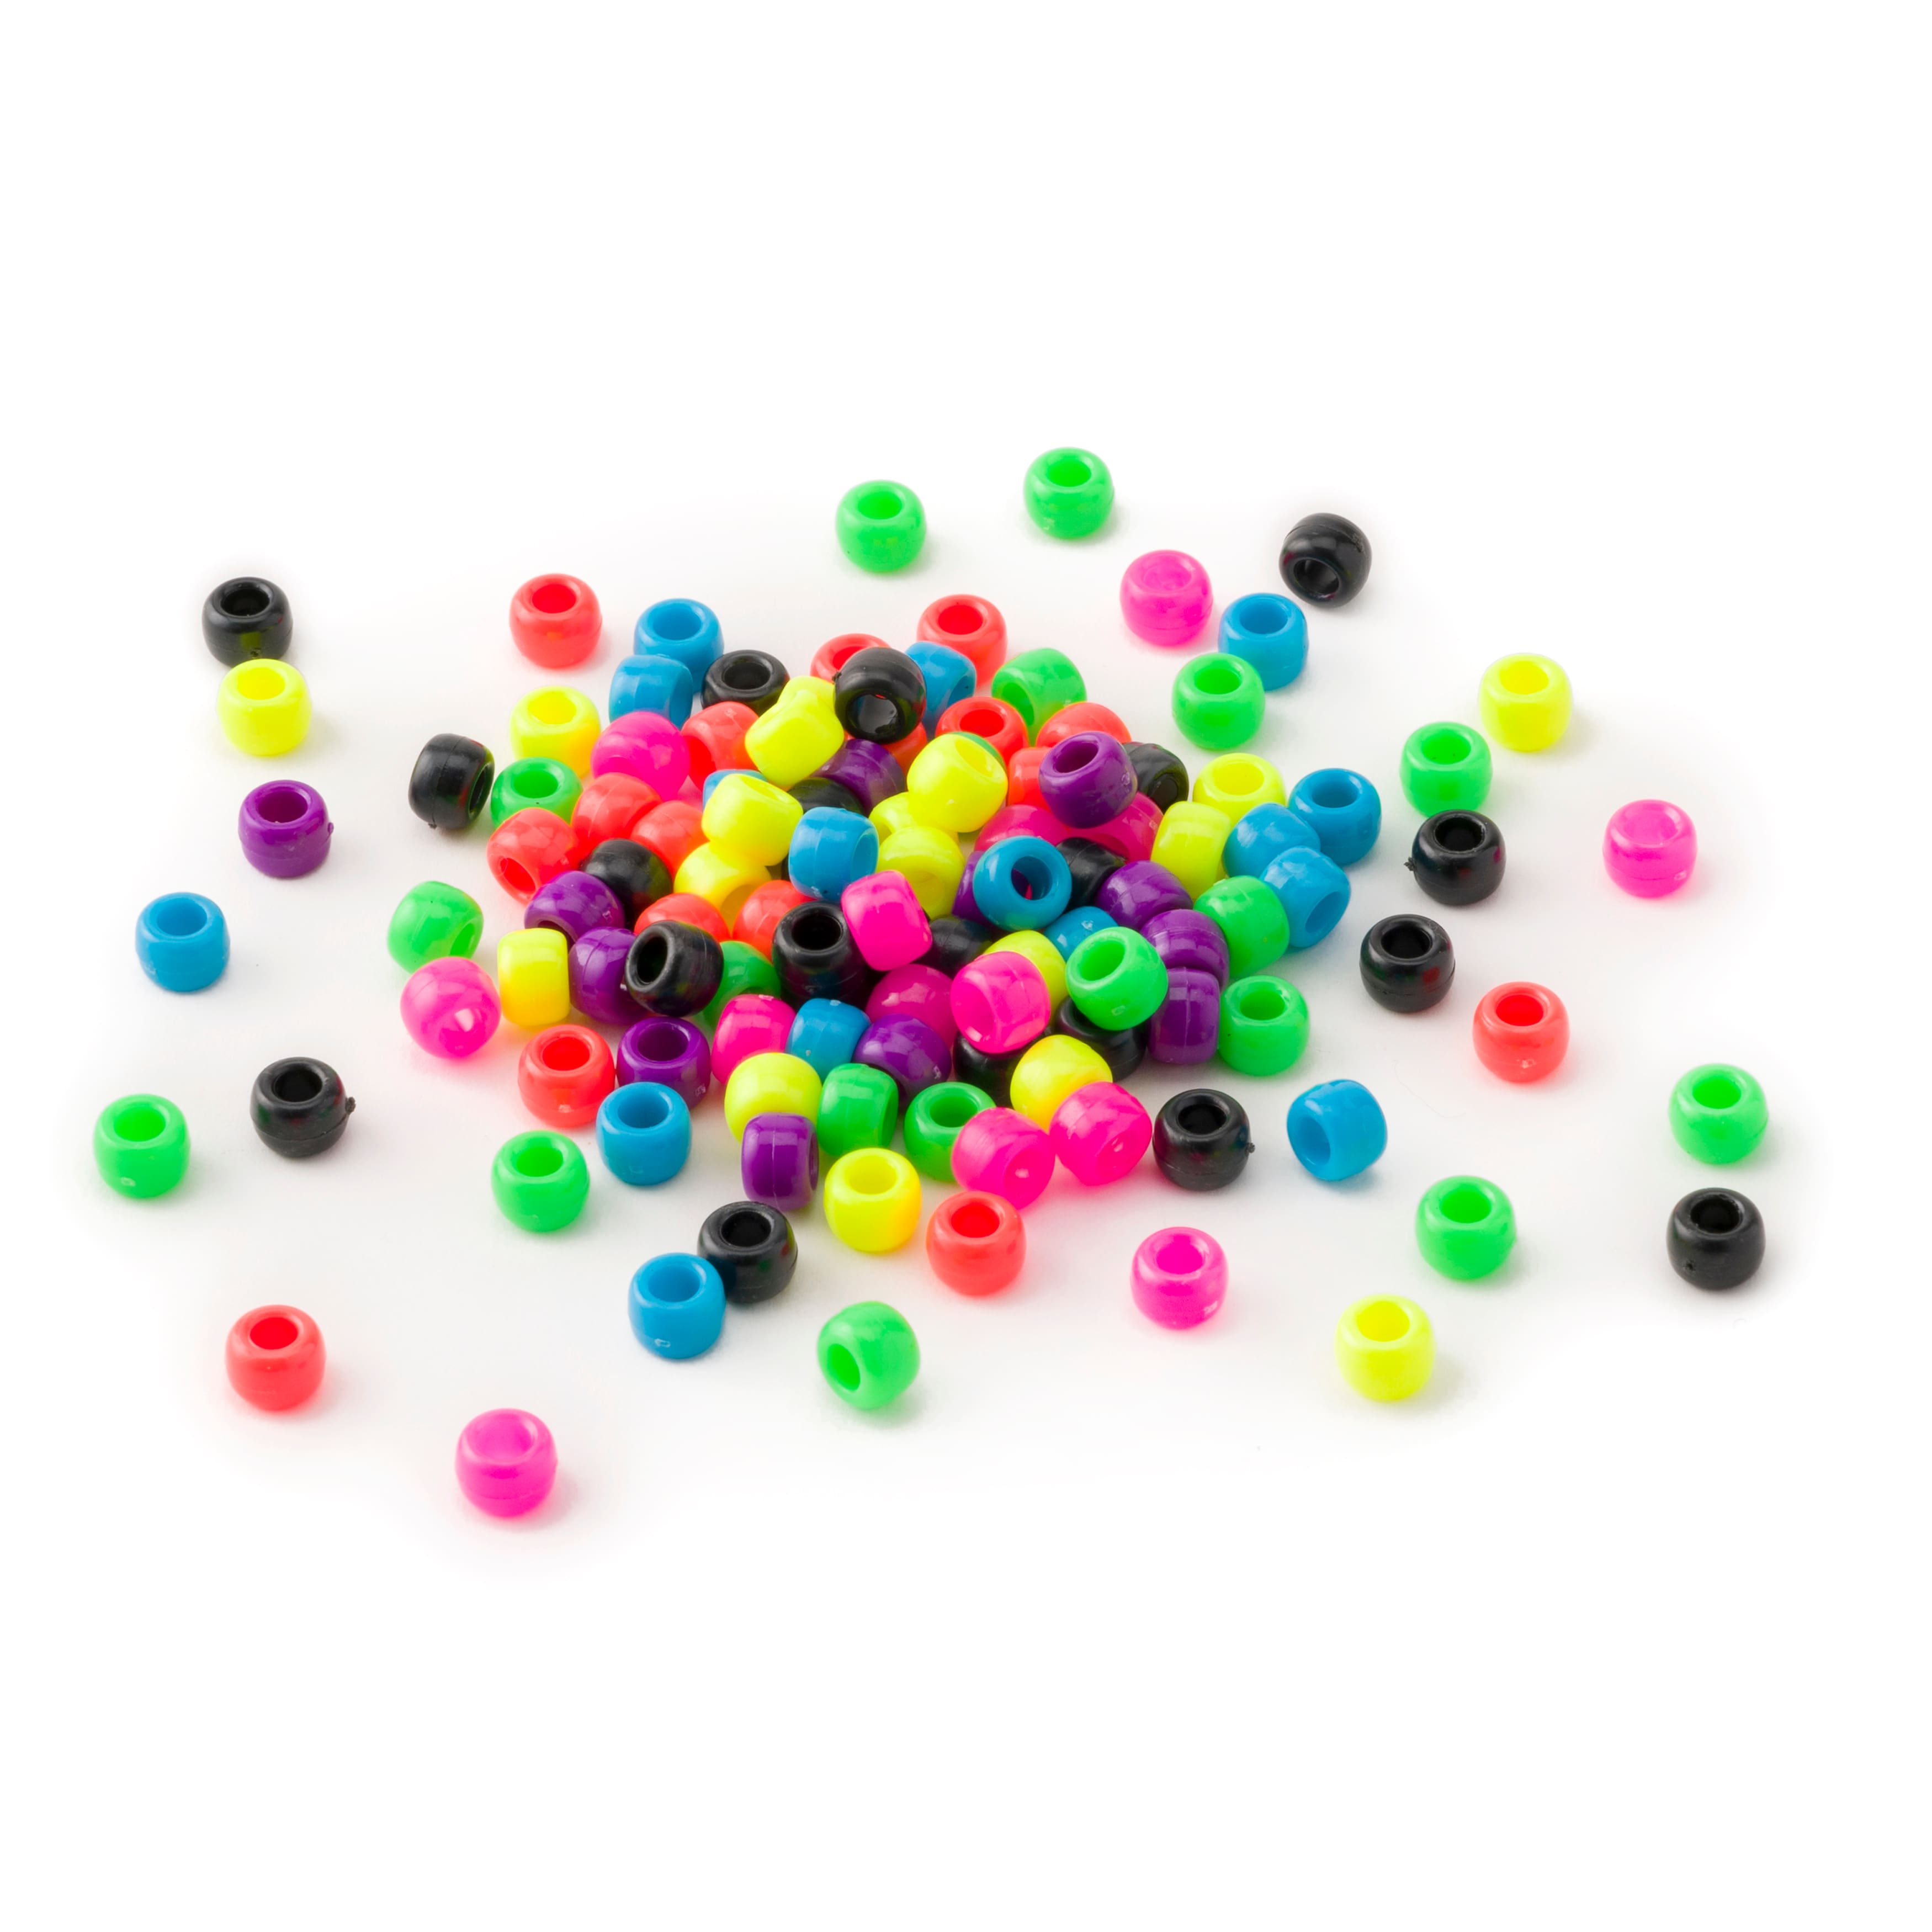 9mm Bright Pony Beads by Creatology | 9mm x 6mm | Michaels